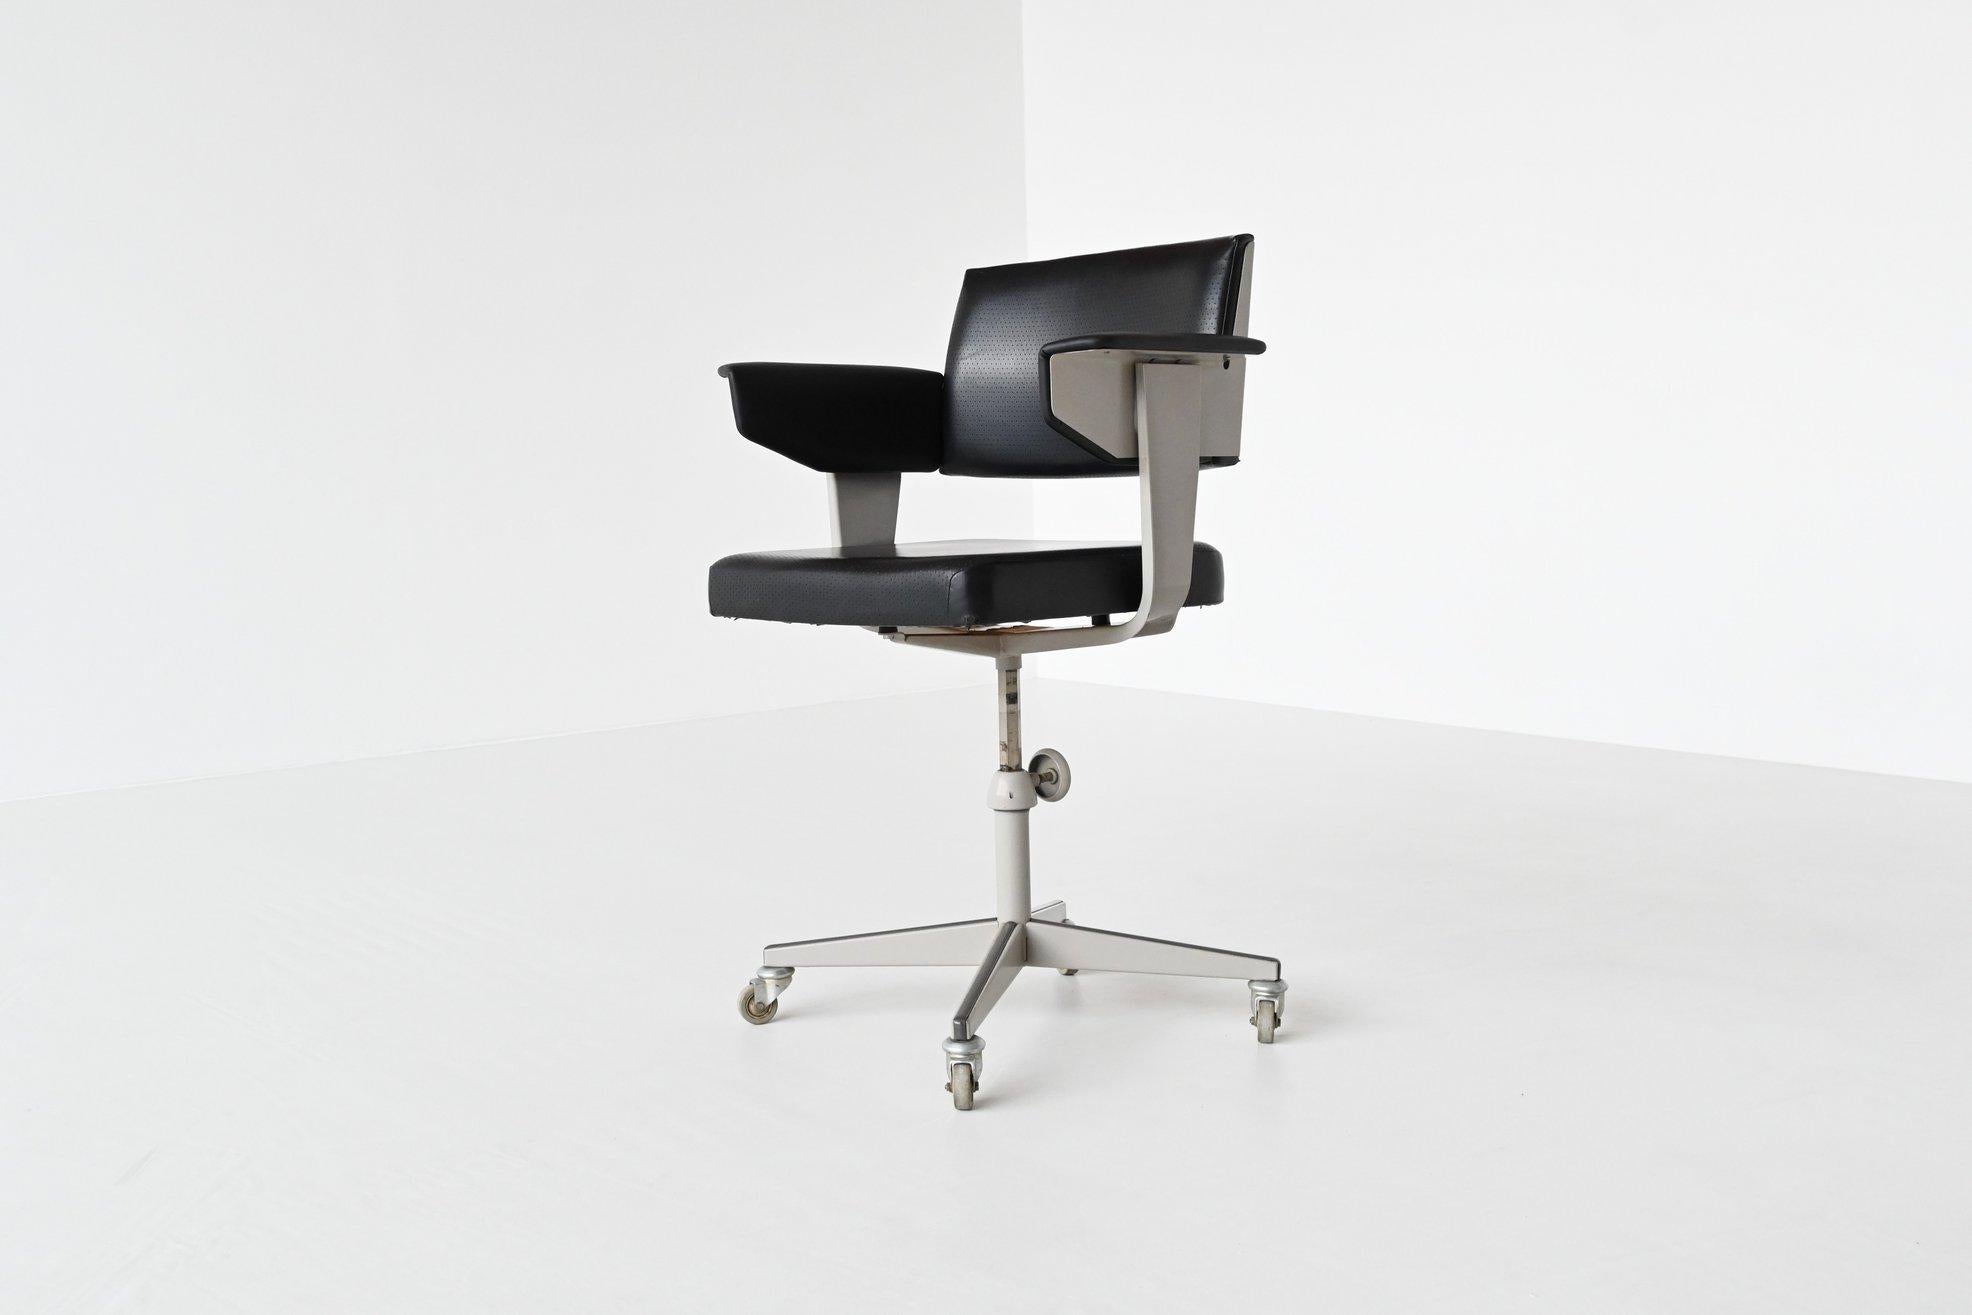 Very nice and rare industrial Resort desk chair designed by Friso Kramer and manufactured by Ahrend de Cirkel, The Netherlands 1960. The chair has a light grey lacquered metal frame with cross legs and wheels. The seat, back and arms are upholstered